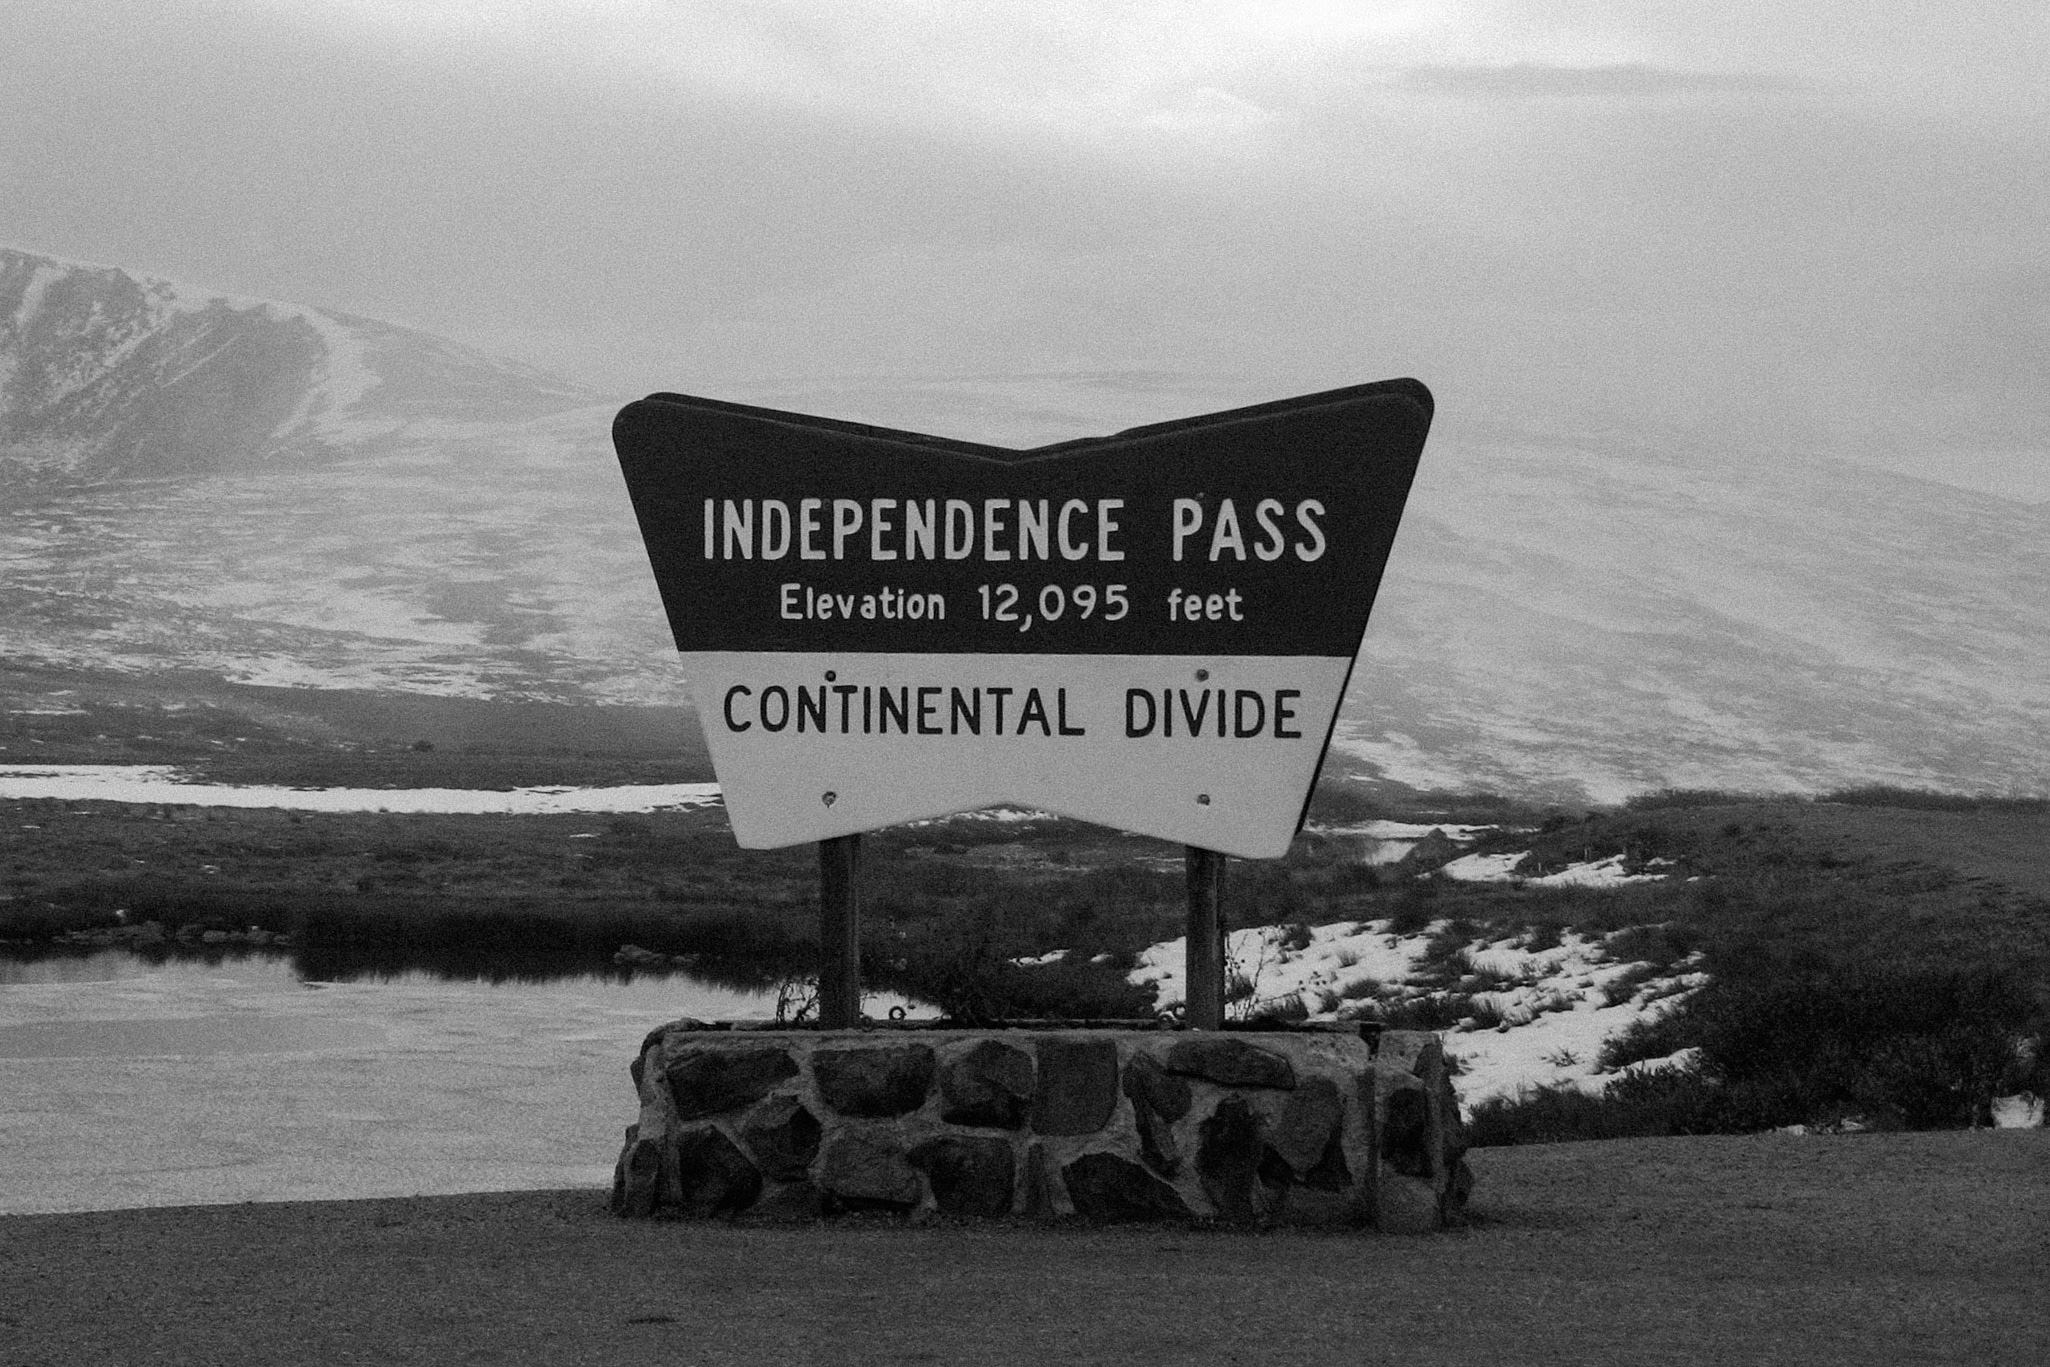 Independence-Pass-Colorado-black-and-white-fine-art-photography-by-Studio-L-photographer-Laura-Schneider-_8389